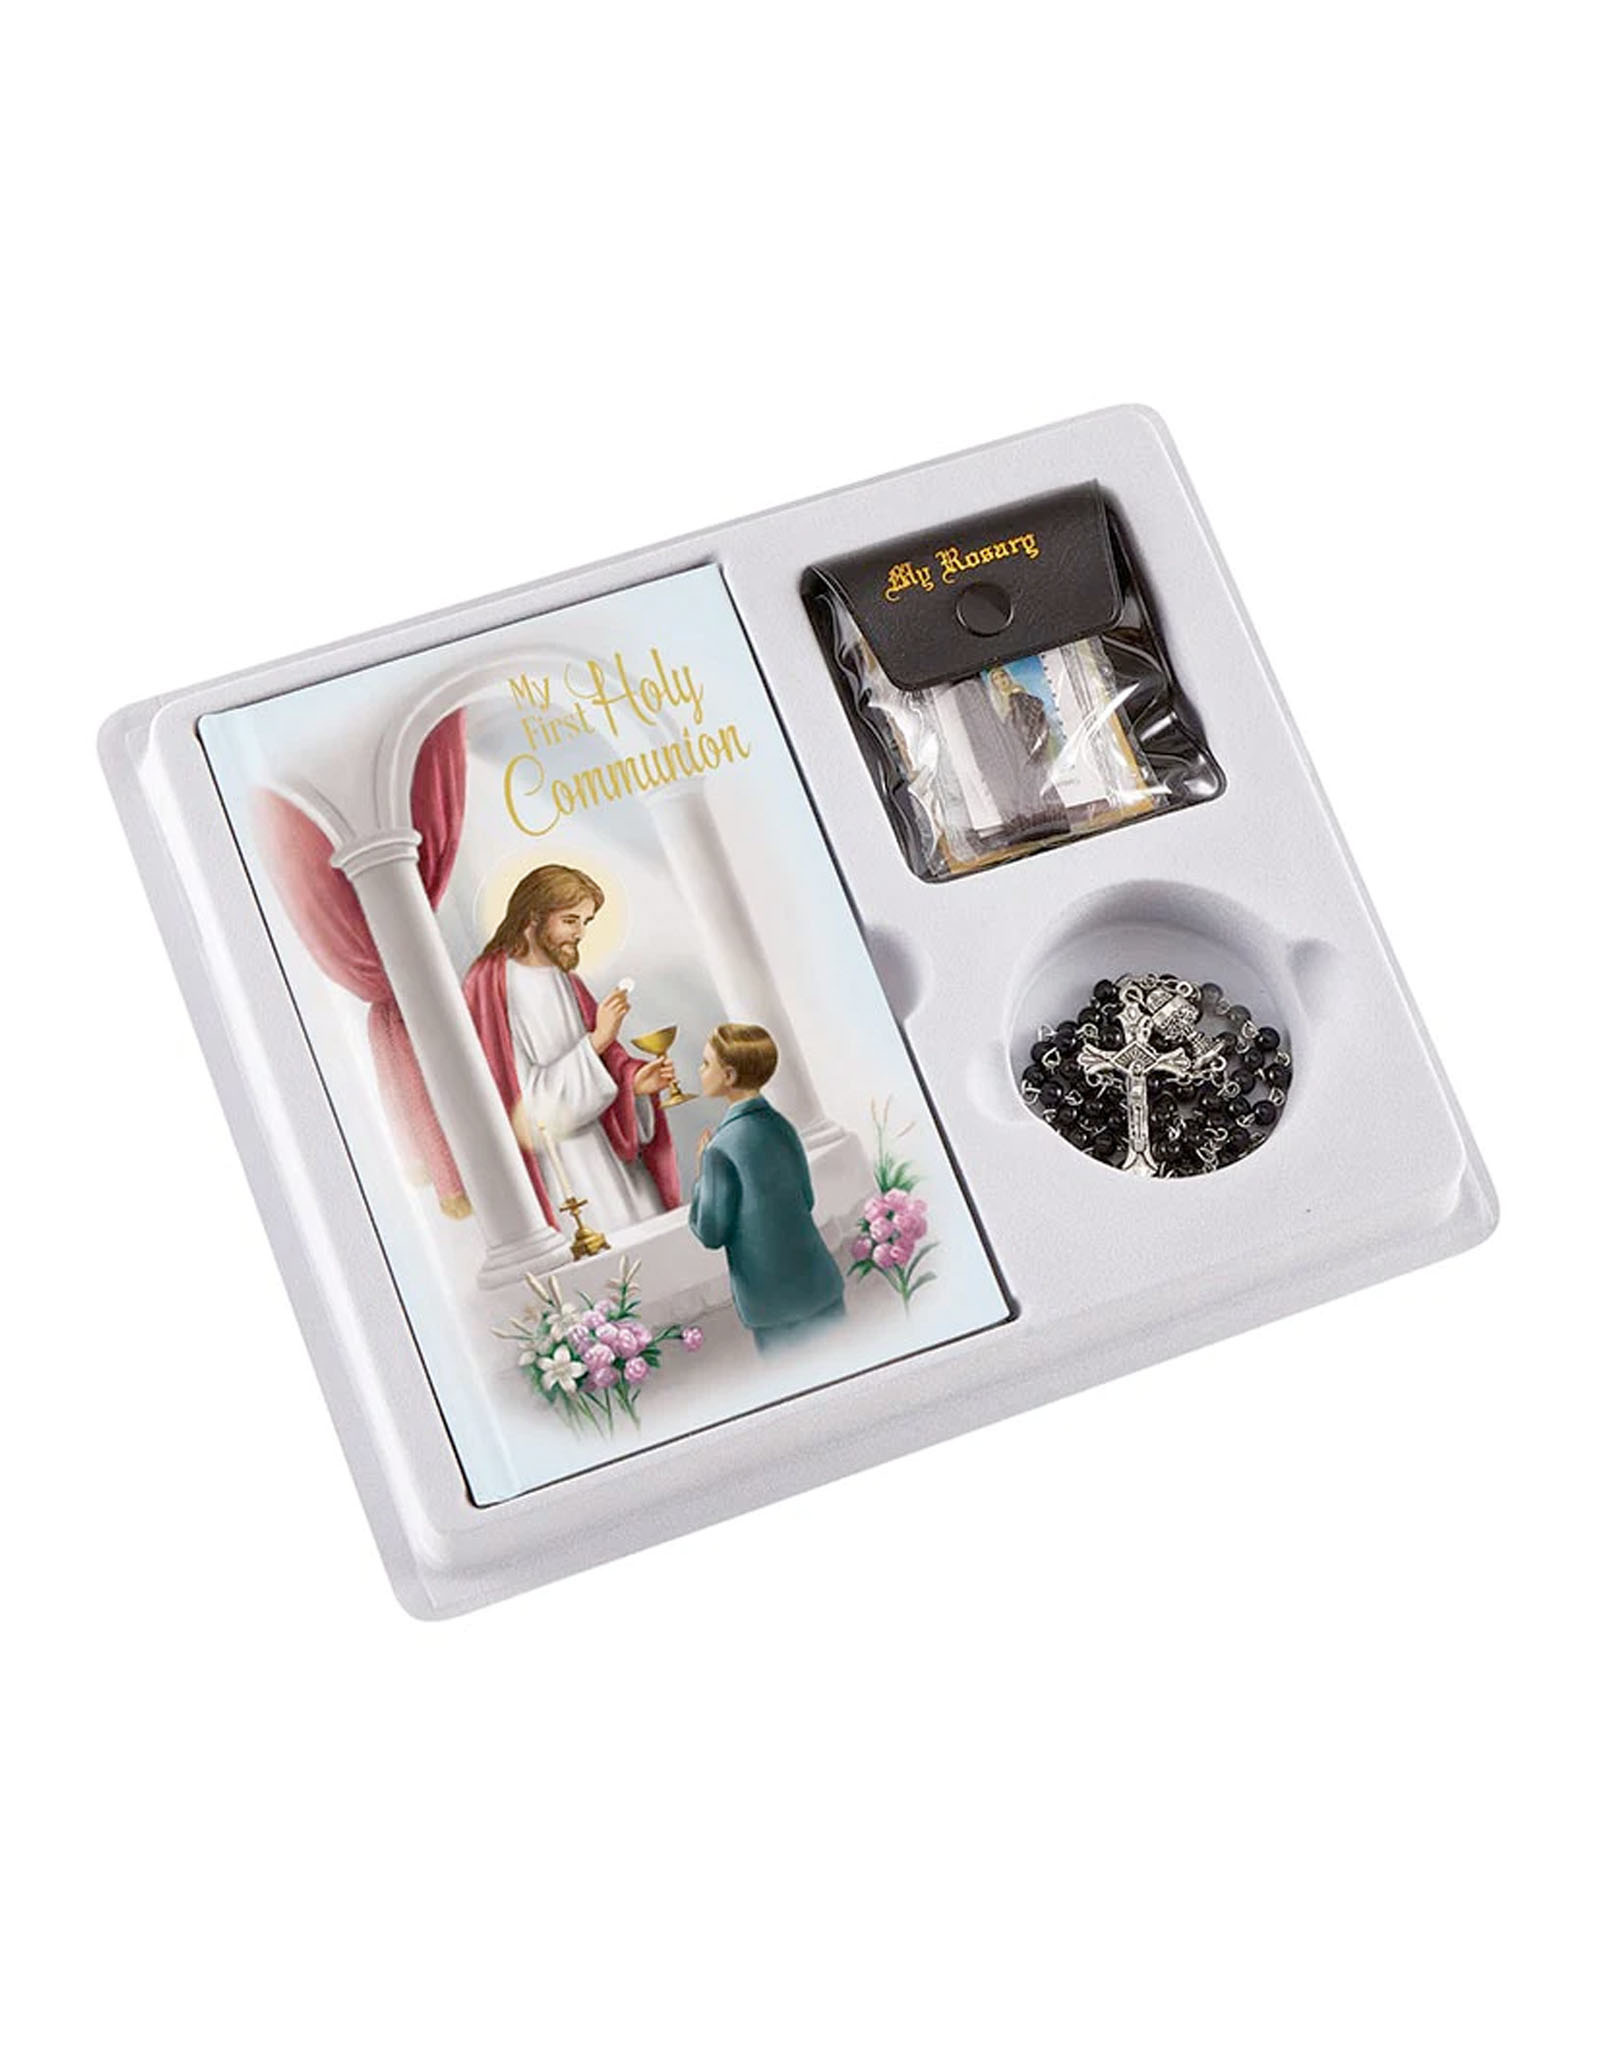 KIDS RELIGIOUS FIRST HOLY COMMUNION BOXED SET - Boy